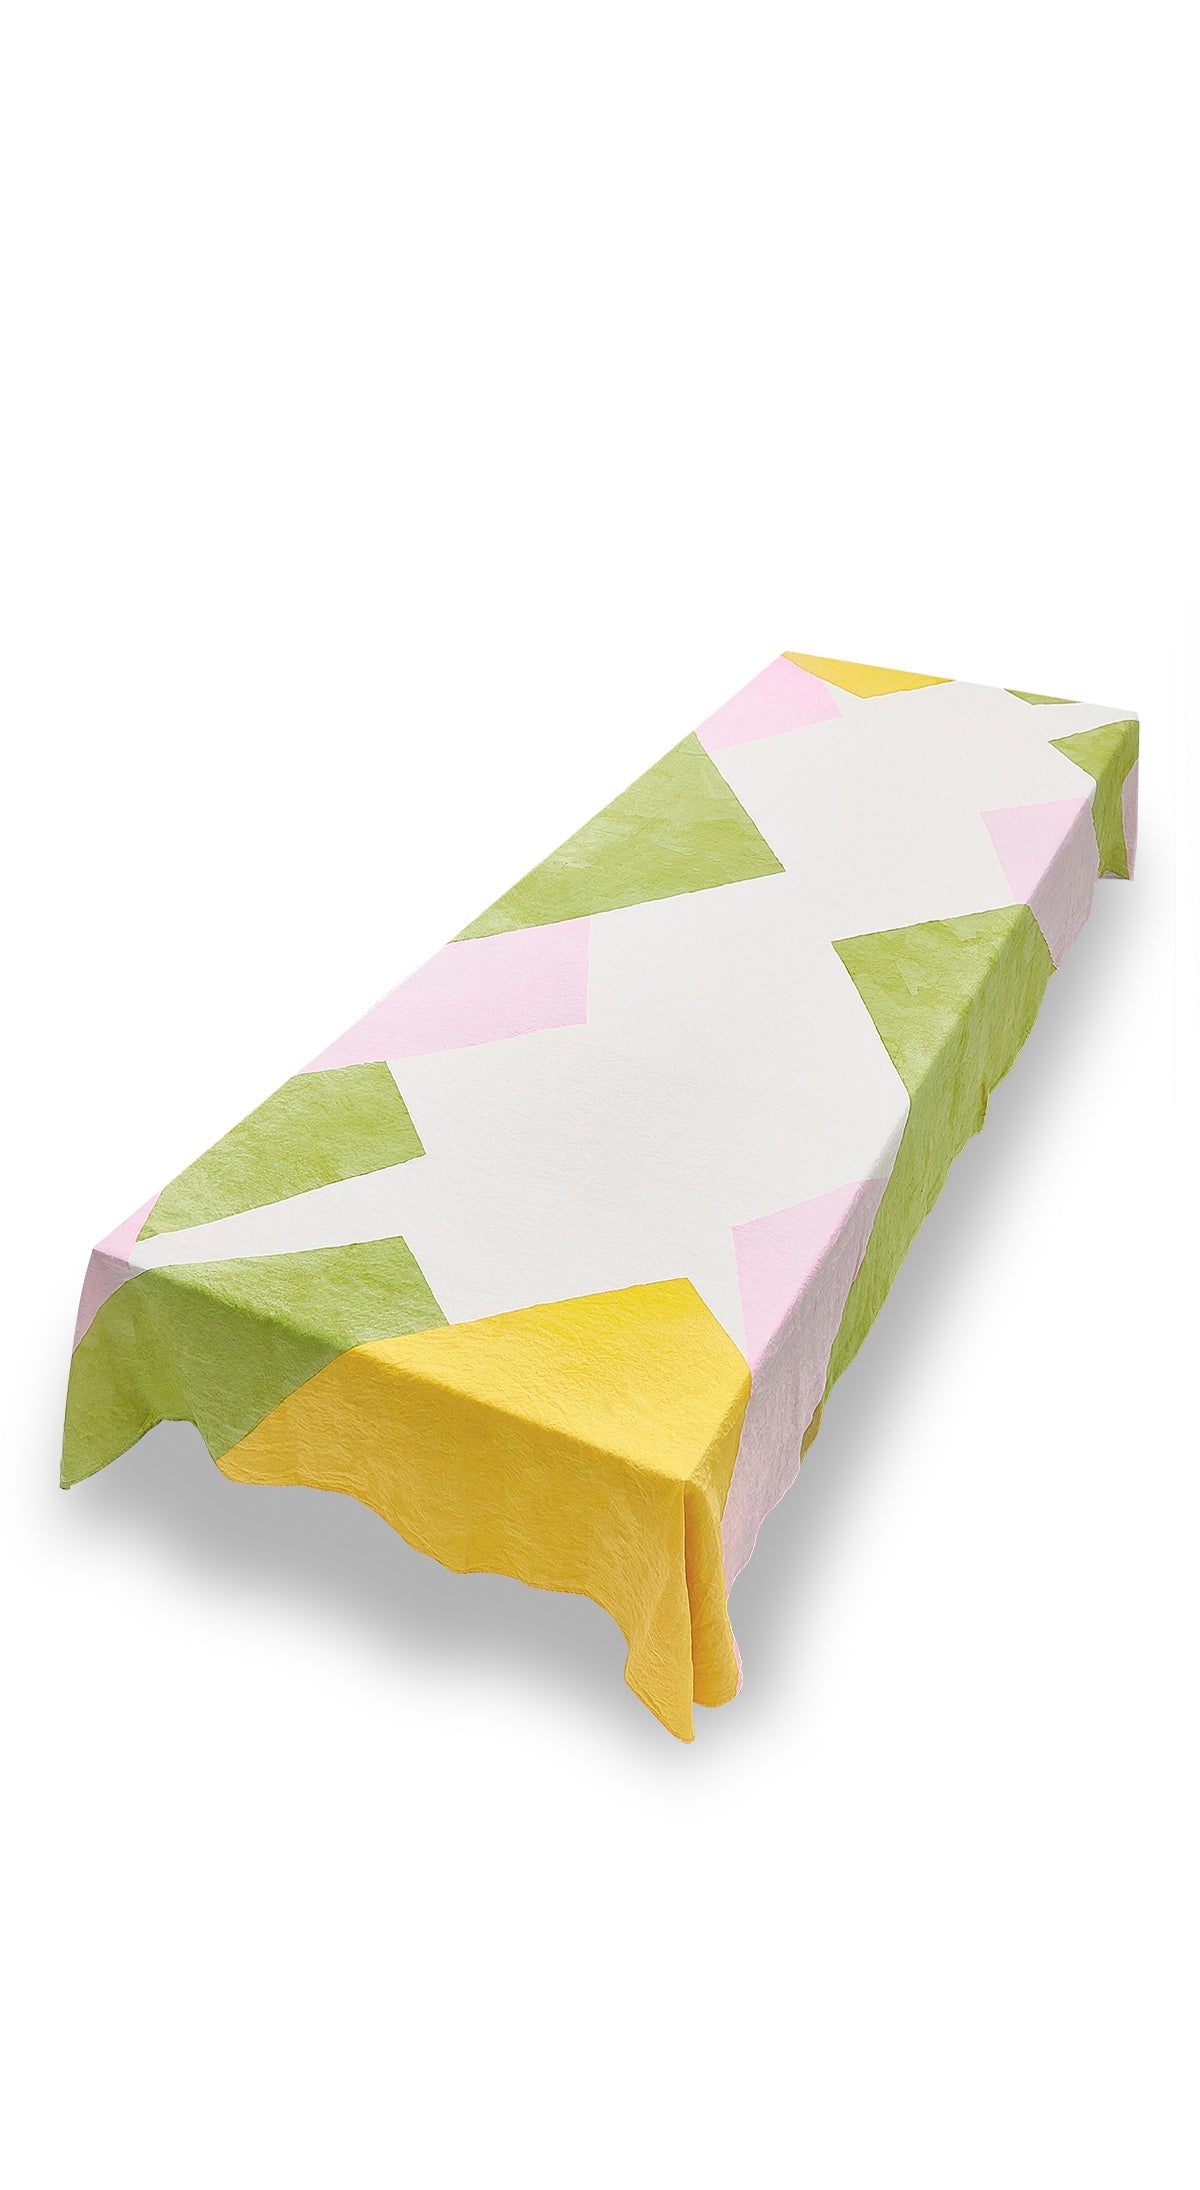 Cubism Linen Tablecloth in Pink, Green and Yellow